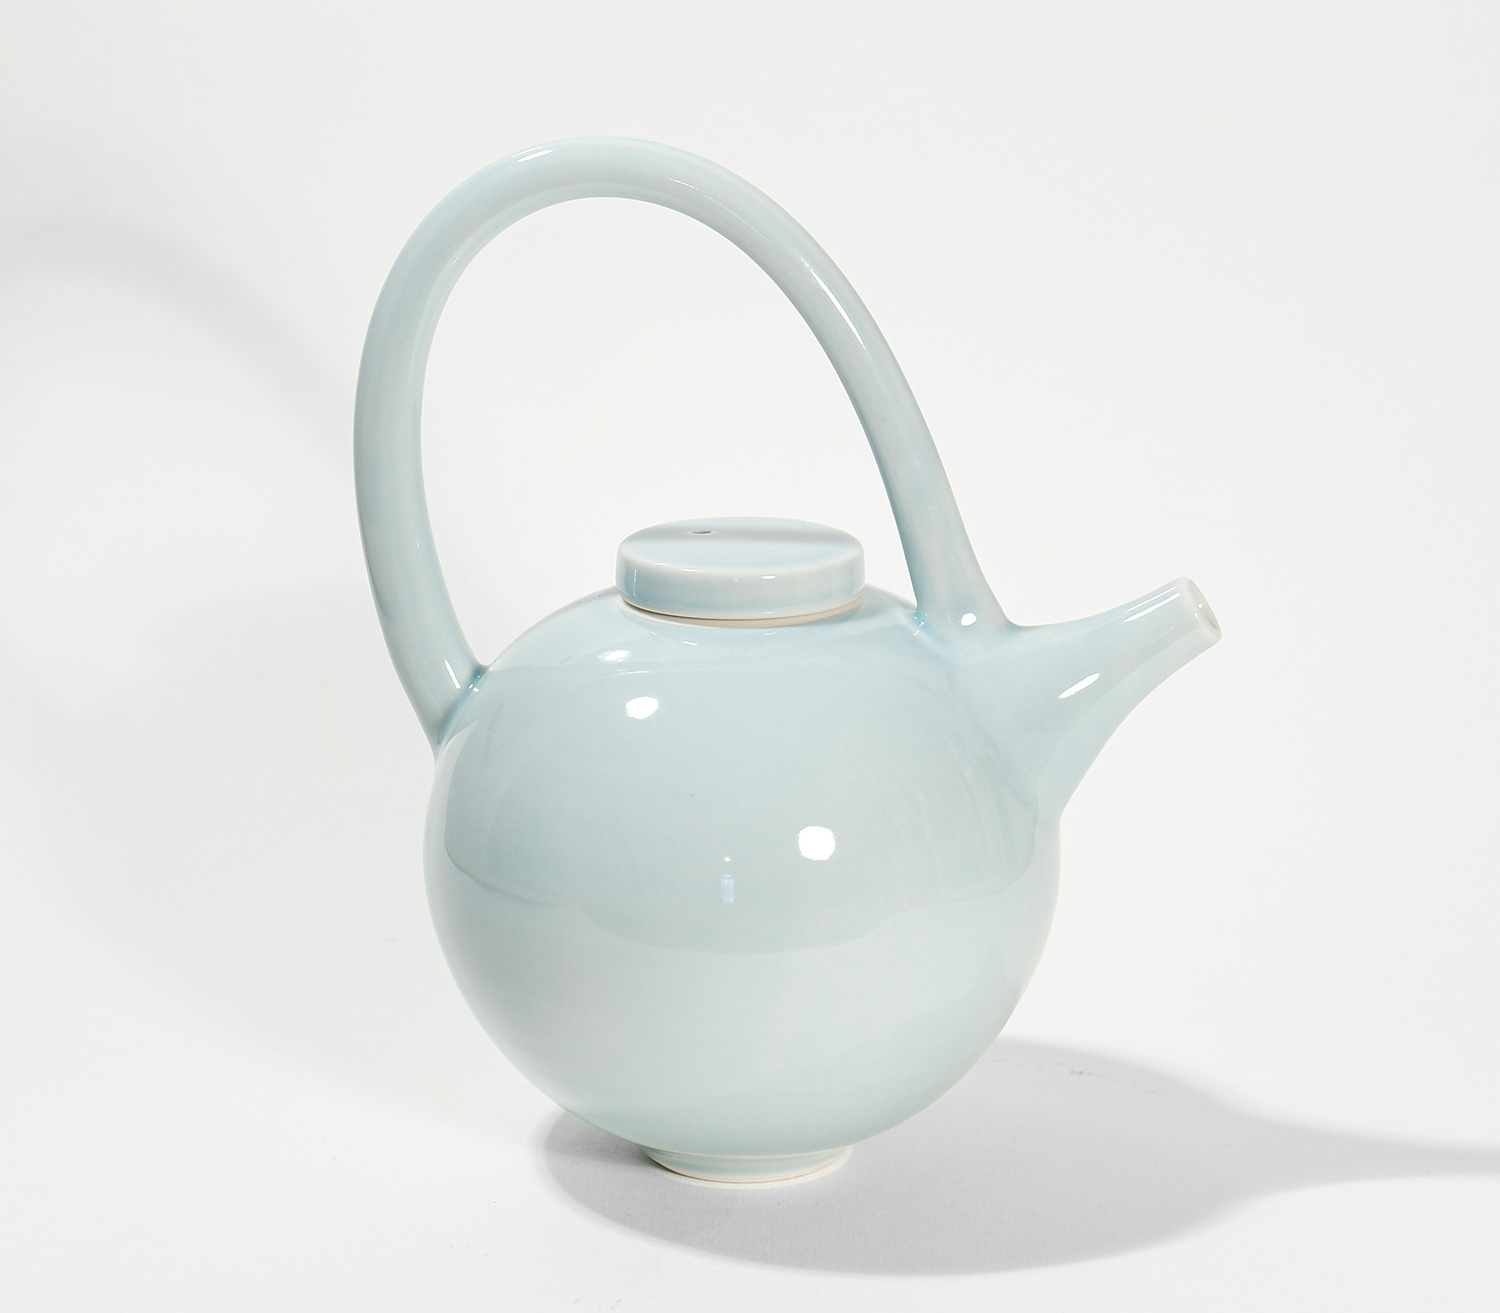 Small Round Teapot by Tricia Thom